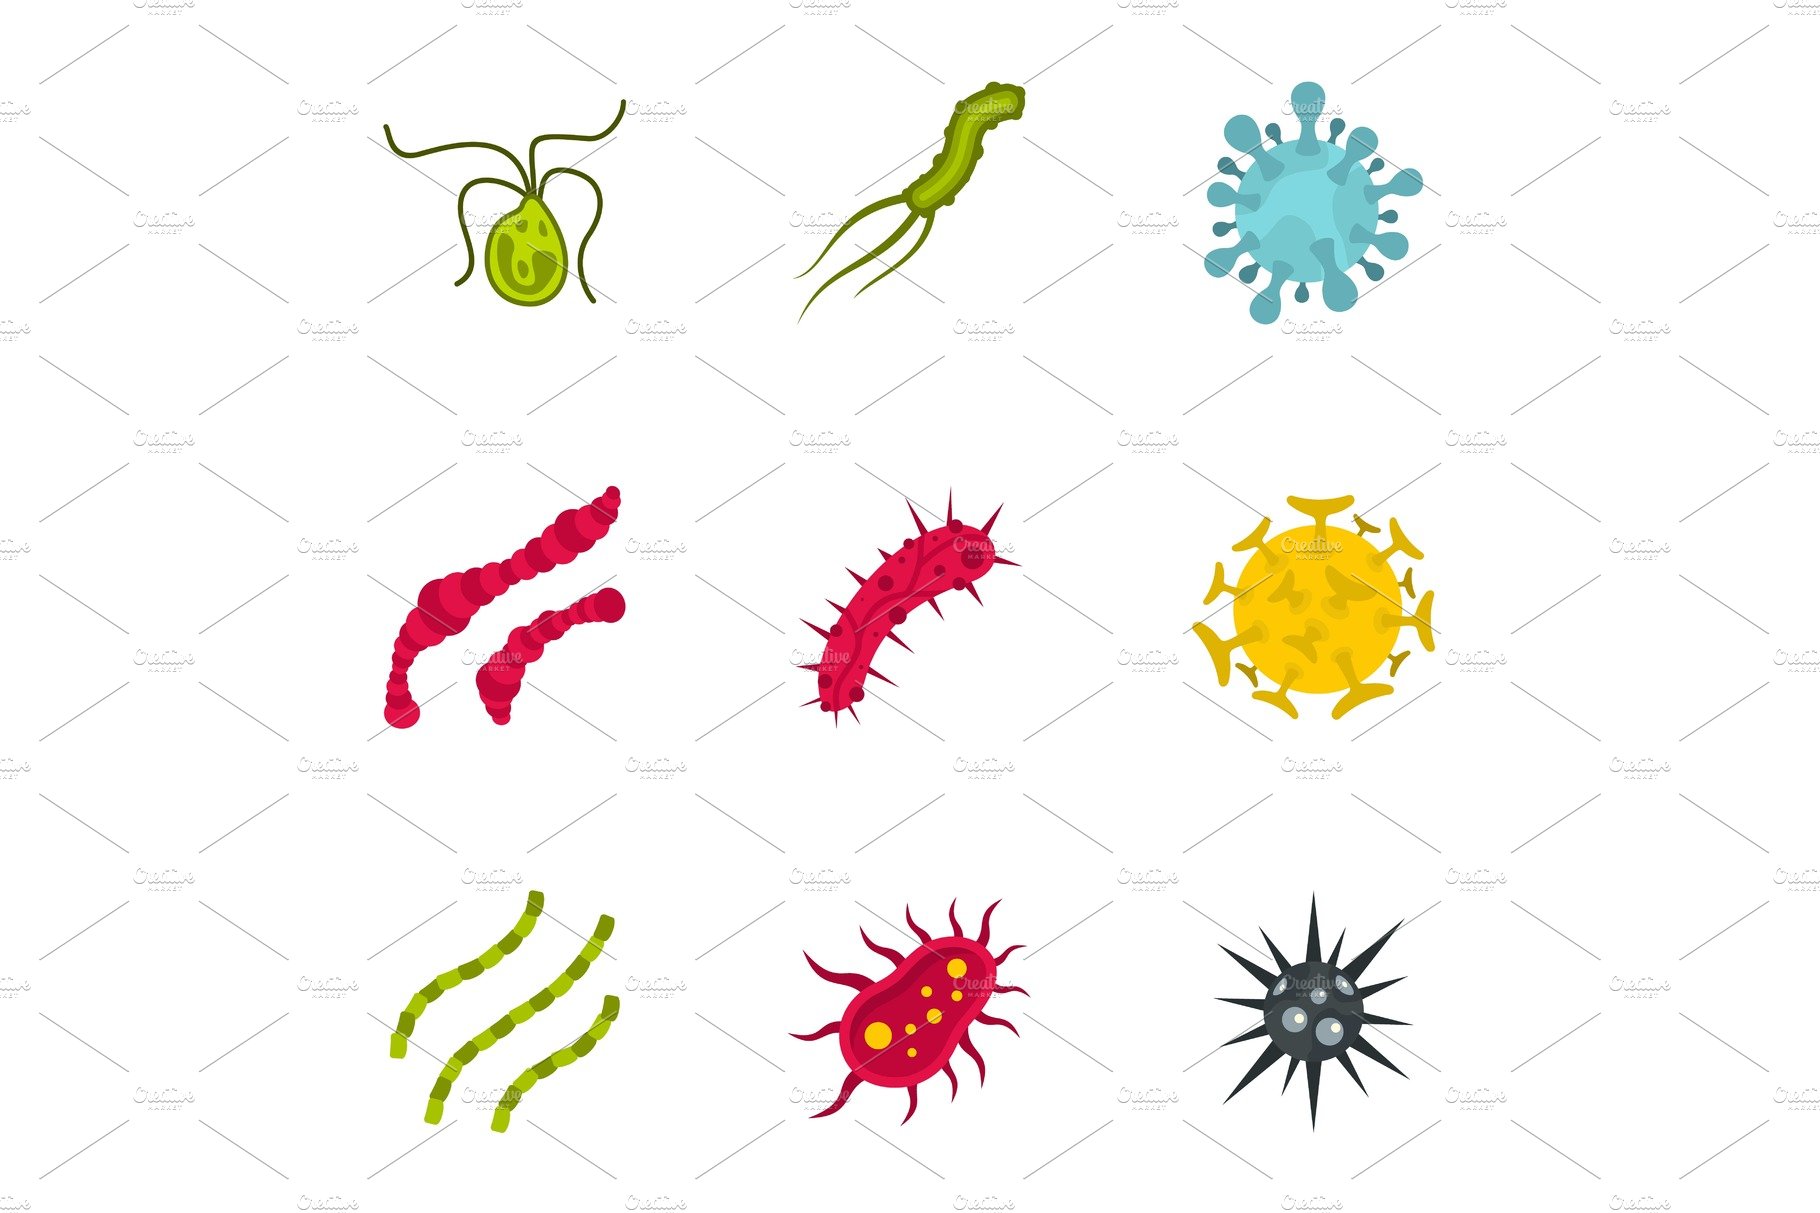 Bacteria icons set, flat style cover image.